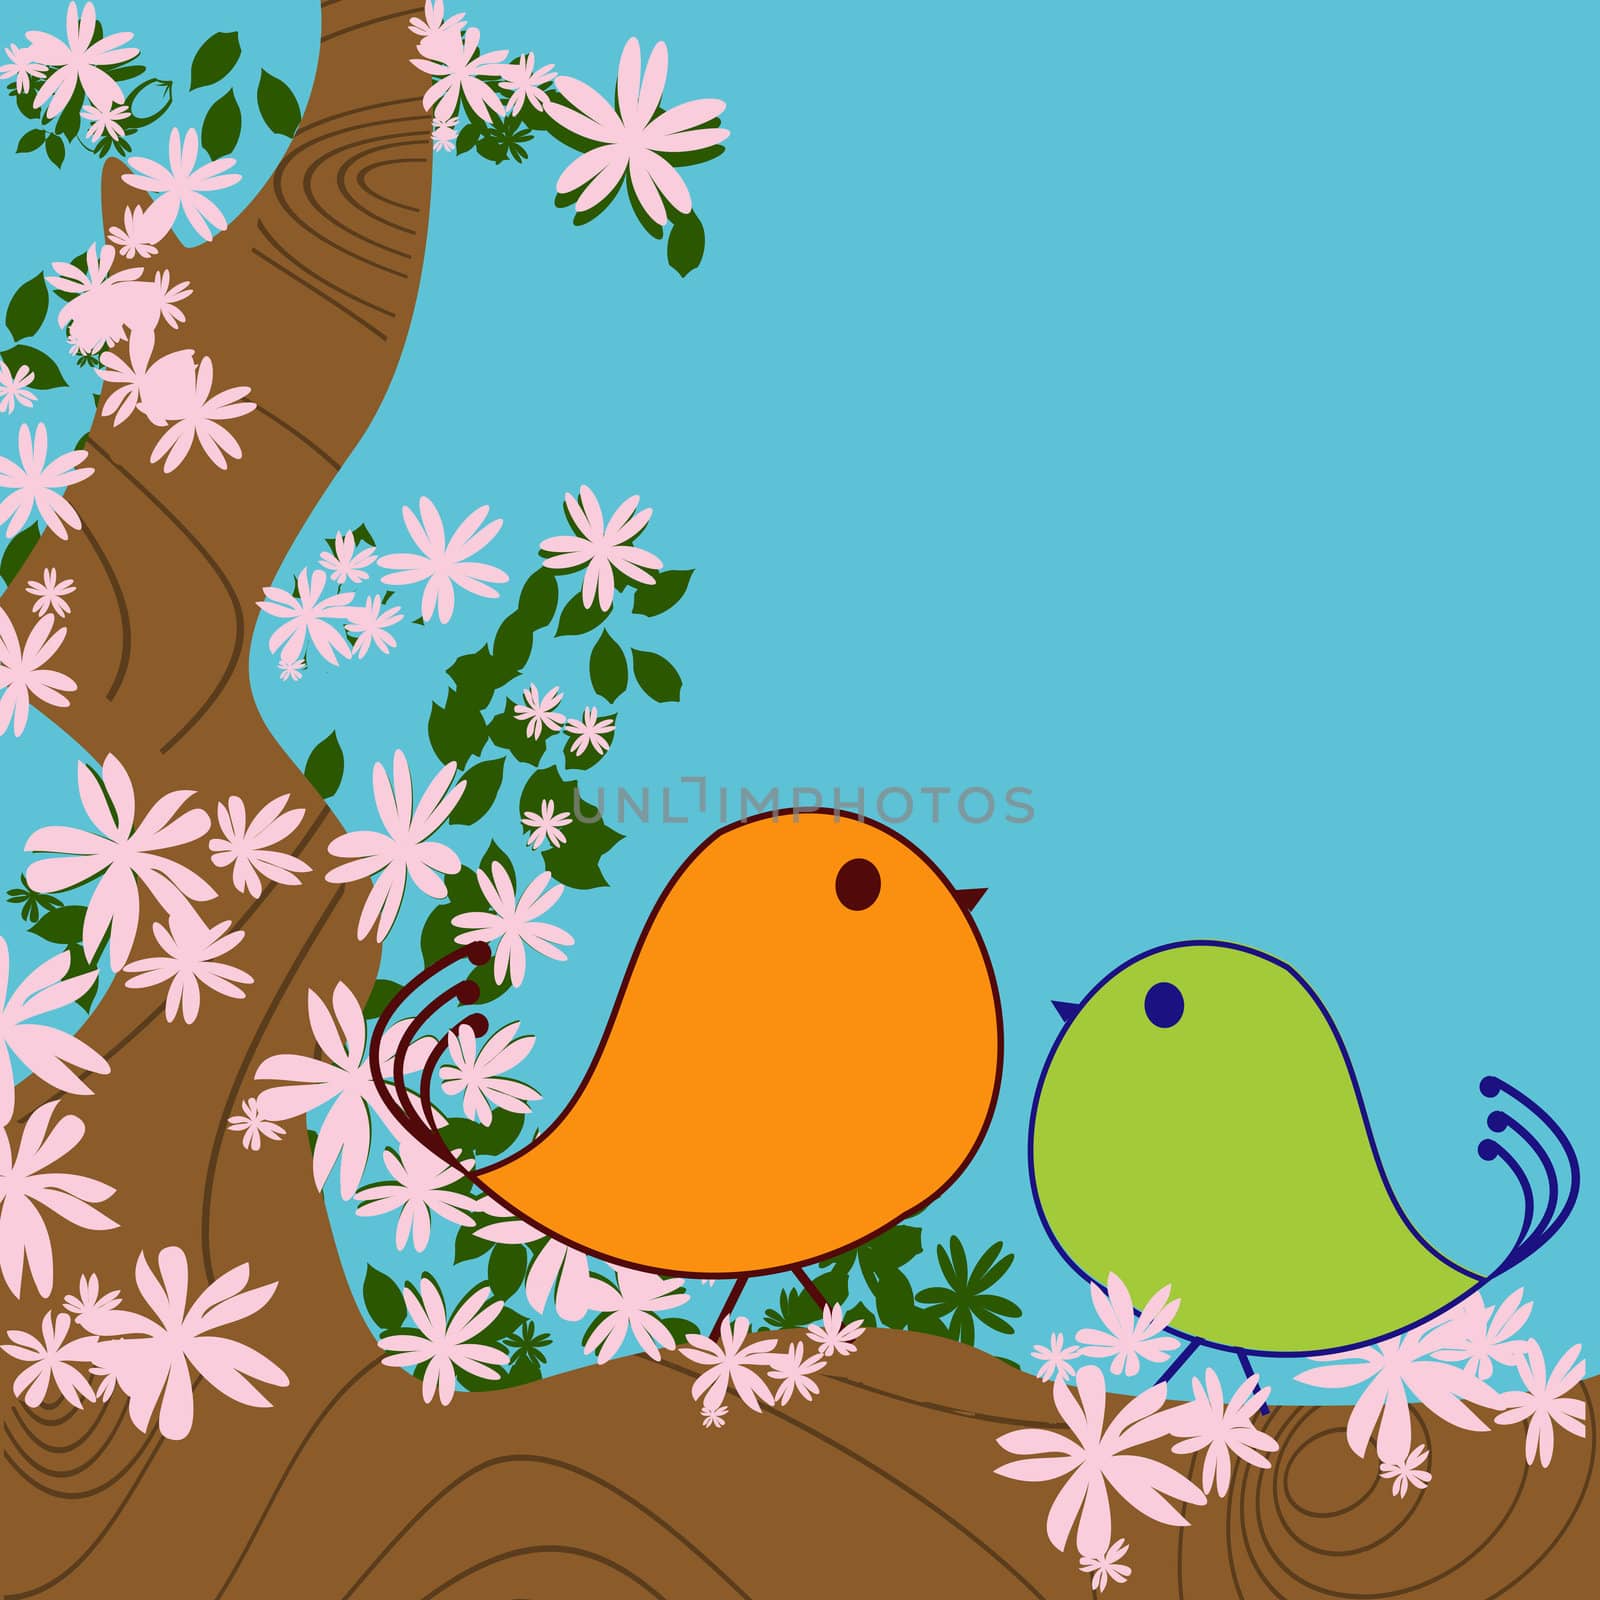 Cute birds and blossom tree background